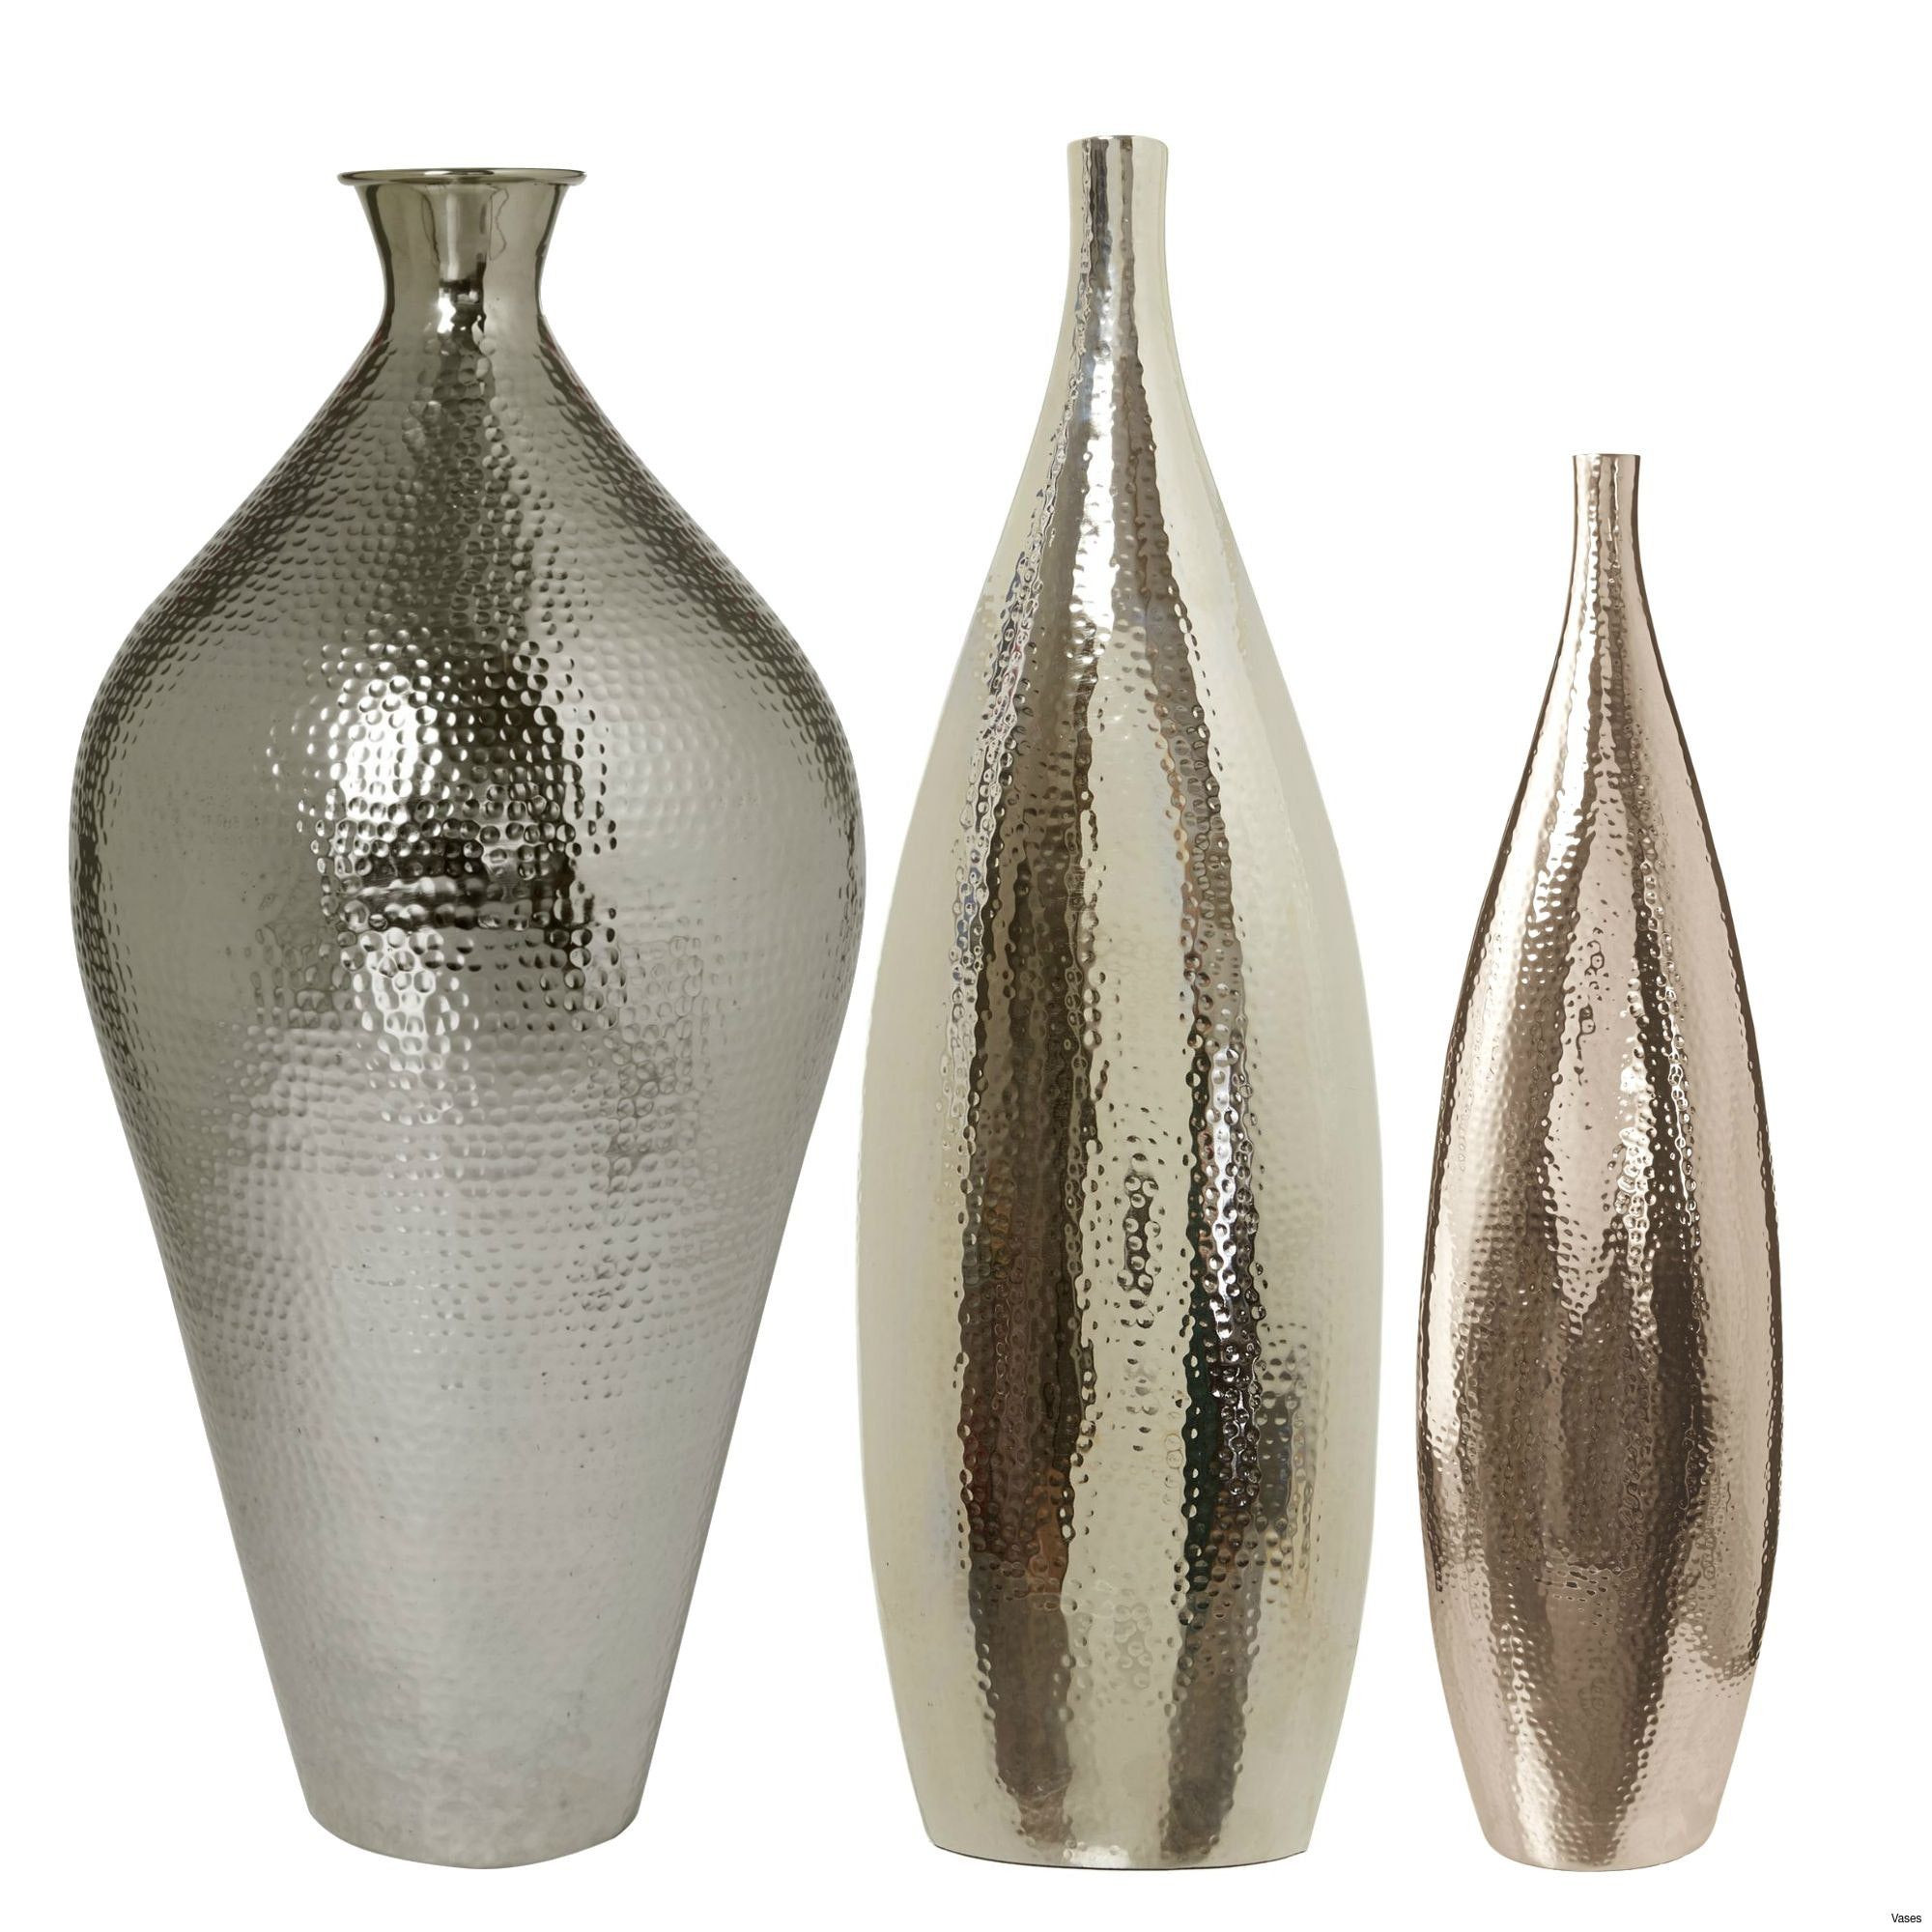 20 Great Tall Glass Hurricane Vase 2024 free download tall glass hurricane vase of tall vase fillers inspirational metal vases vase and cellar image pertaining to tall vase fillers inspirational metal vases vase and cellar image avorcor